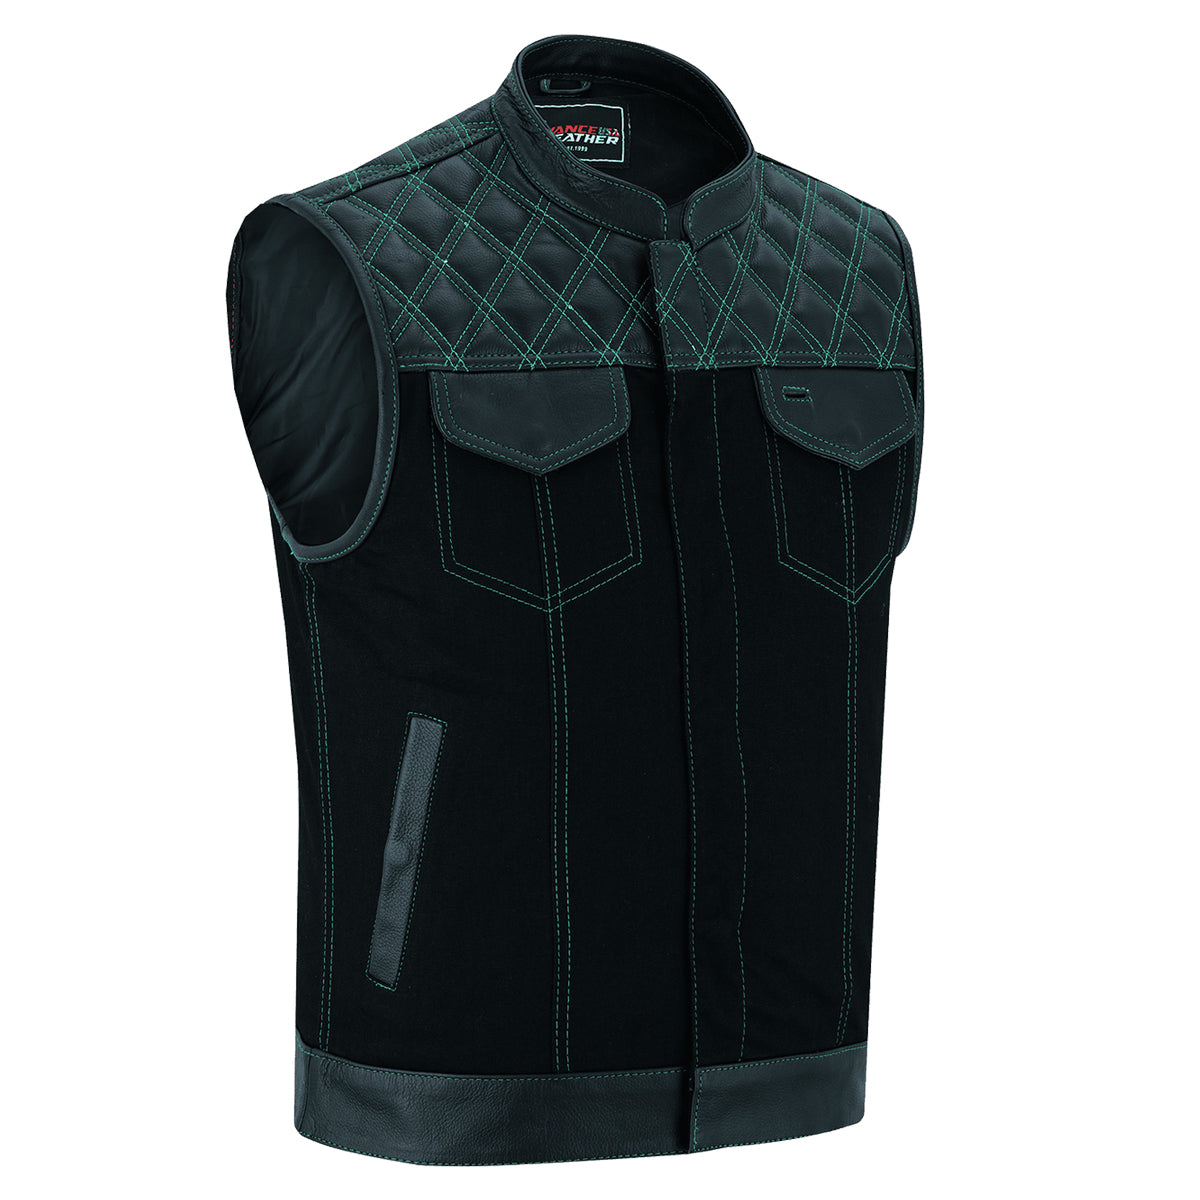 Men's Denim & Leather Motorcycle Vest with Conceal Carry Pockets, SOA Biker Club Vest Green Stitching, Diamond Padding, Snap & Zipper Closure